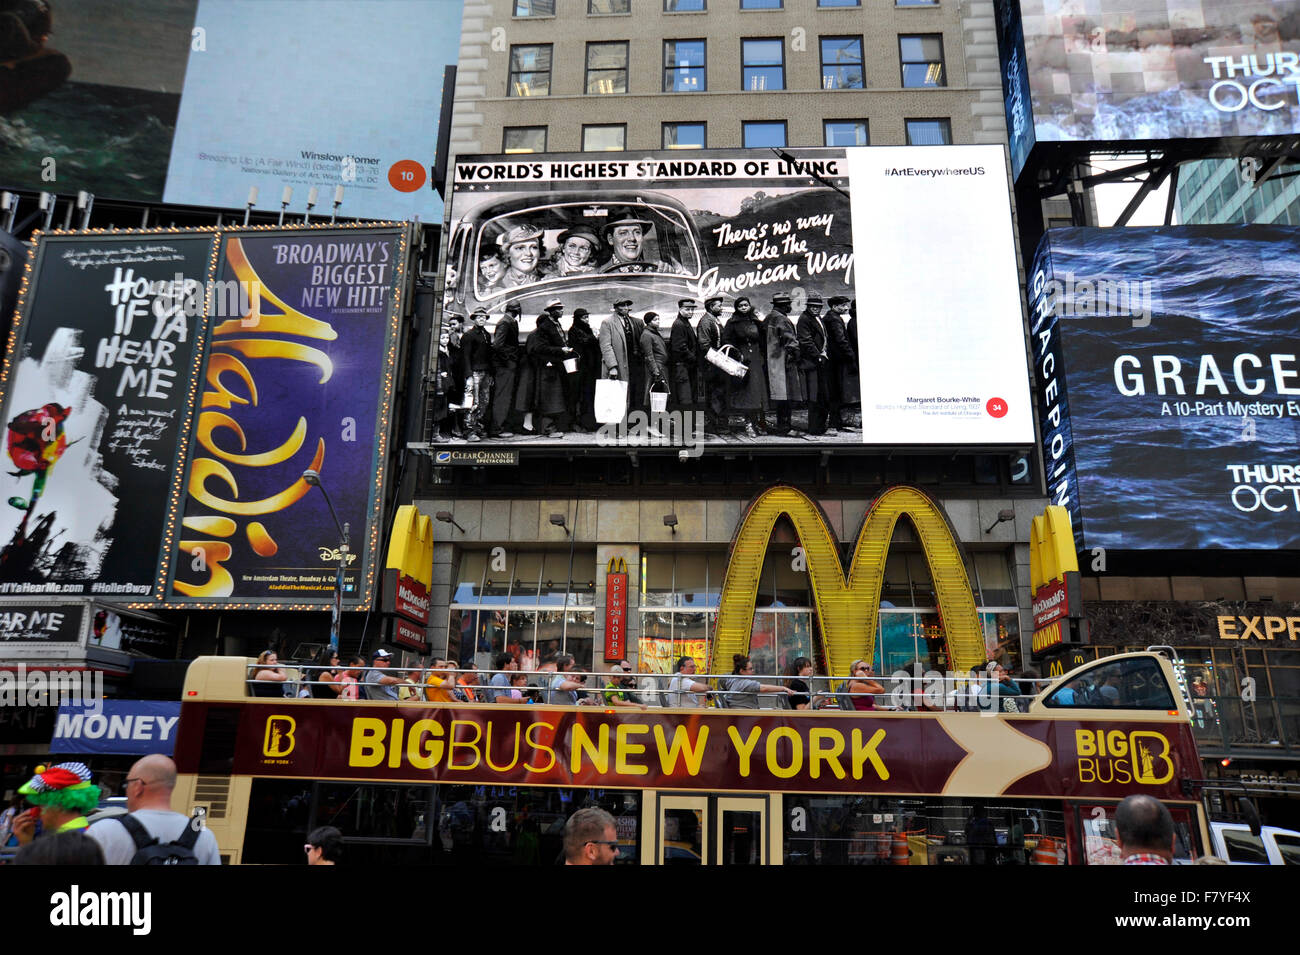 Fine Art photography by Margaret Bourke White  appears on digital billboards in New York's Times Square during the Art Everywhere event. Stock Photo